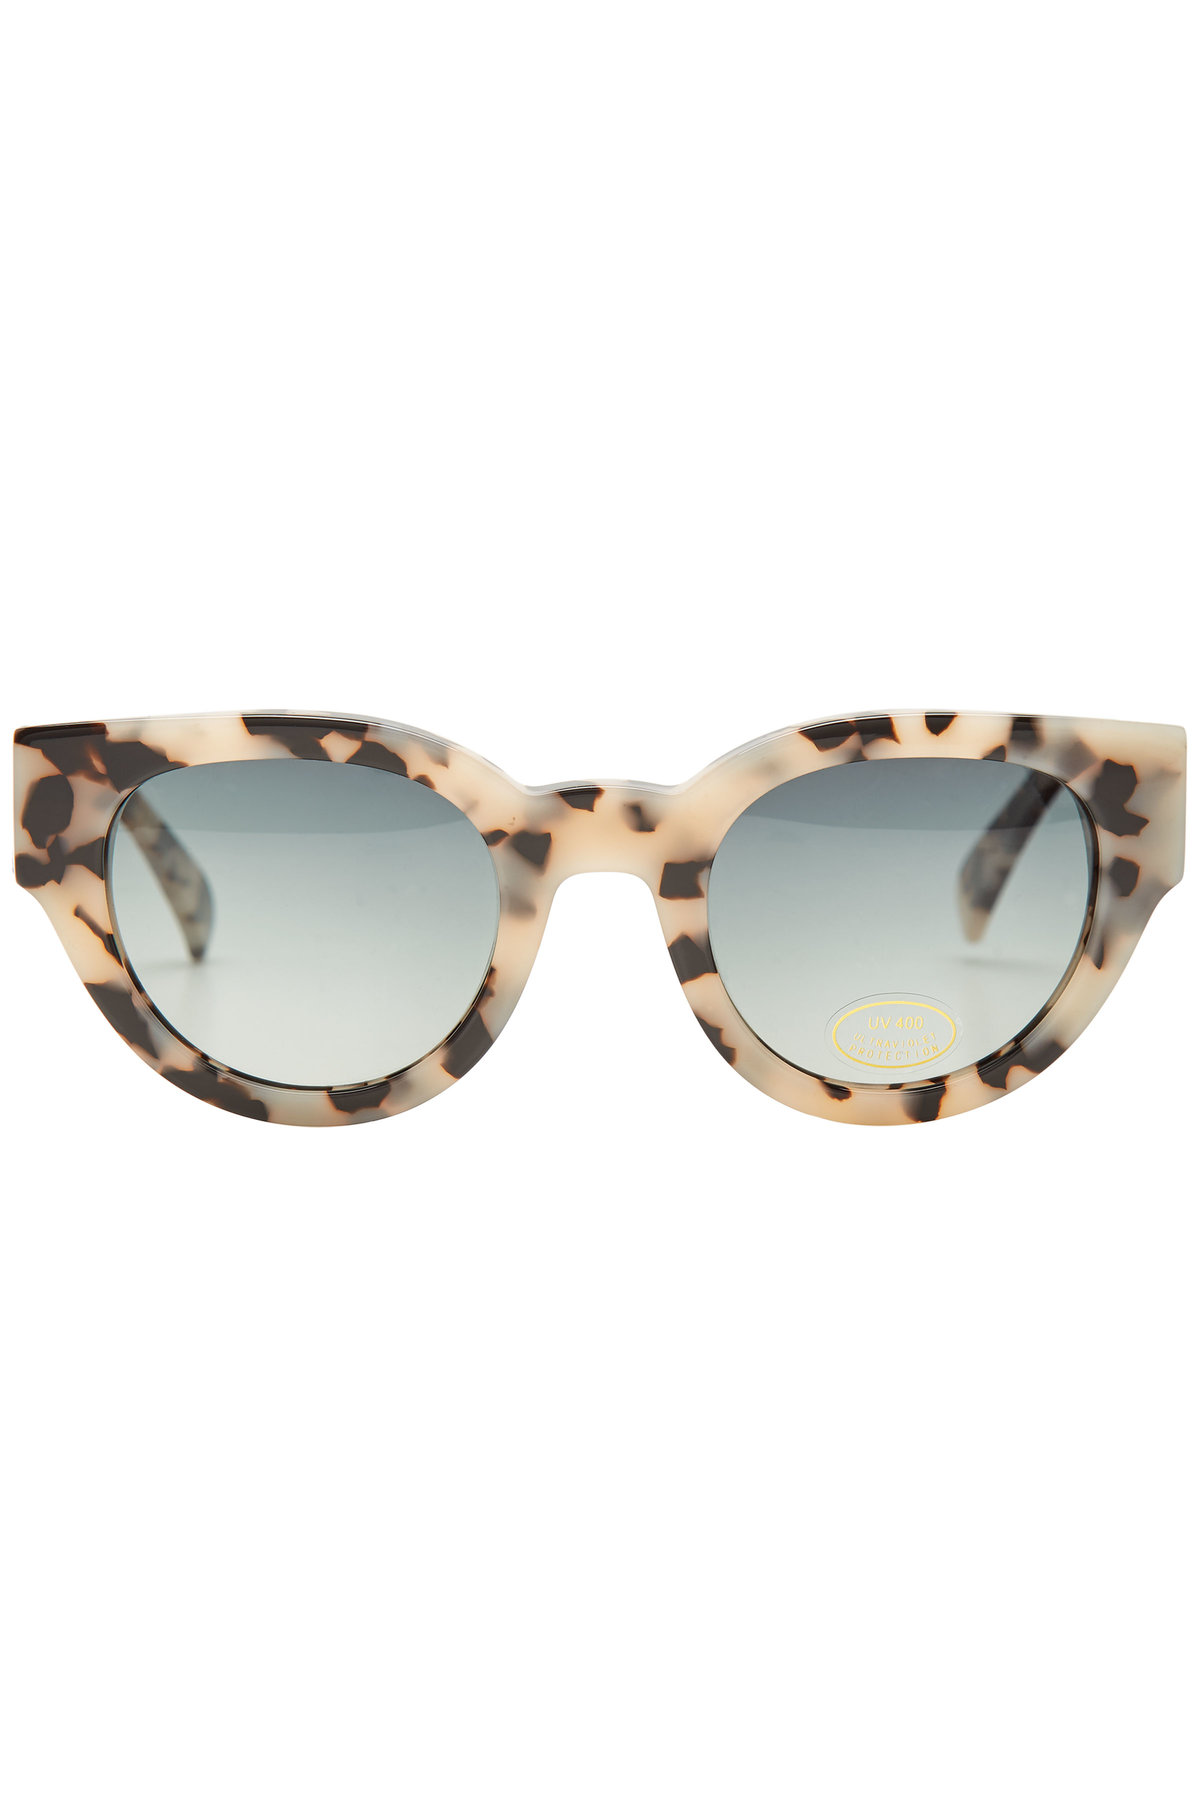 Anine Bing Trousdale Printed Cat Eye Sunglasses In Multicolored | ModeSens